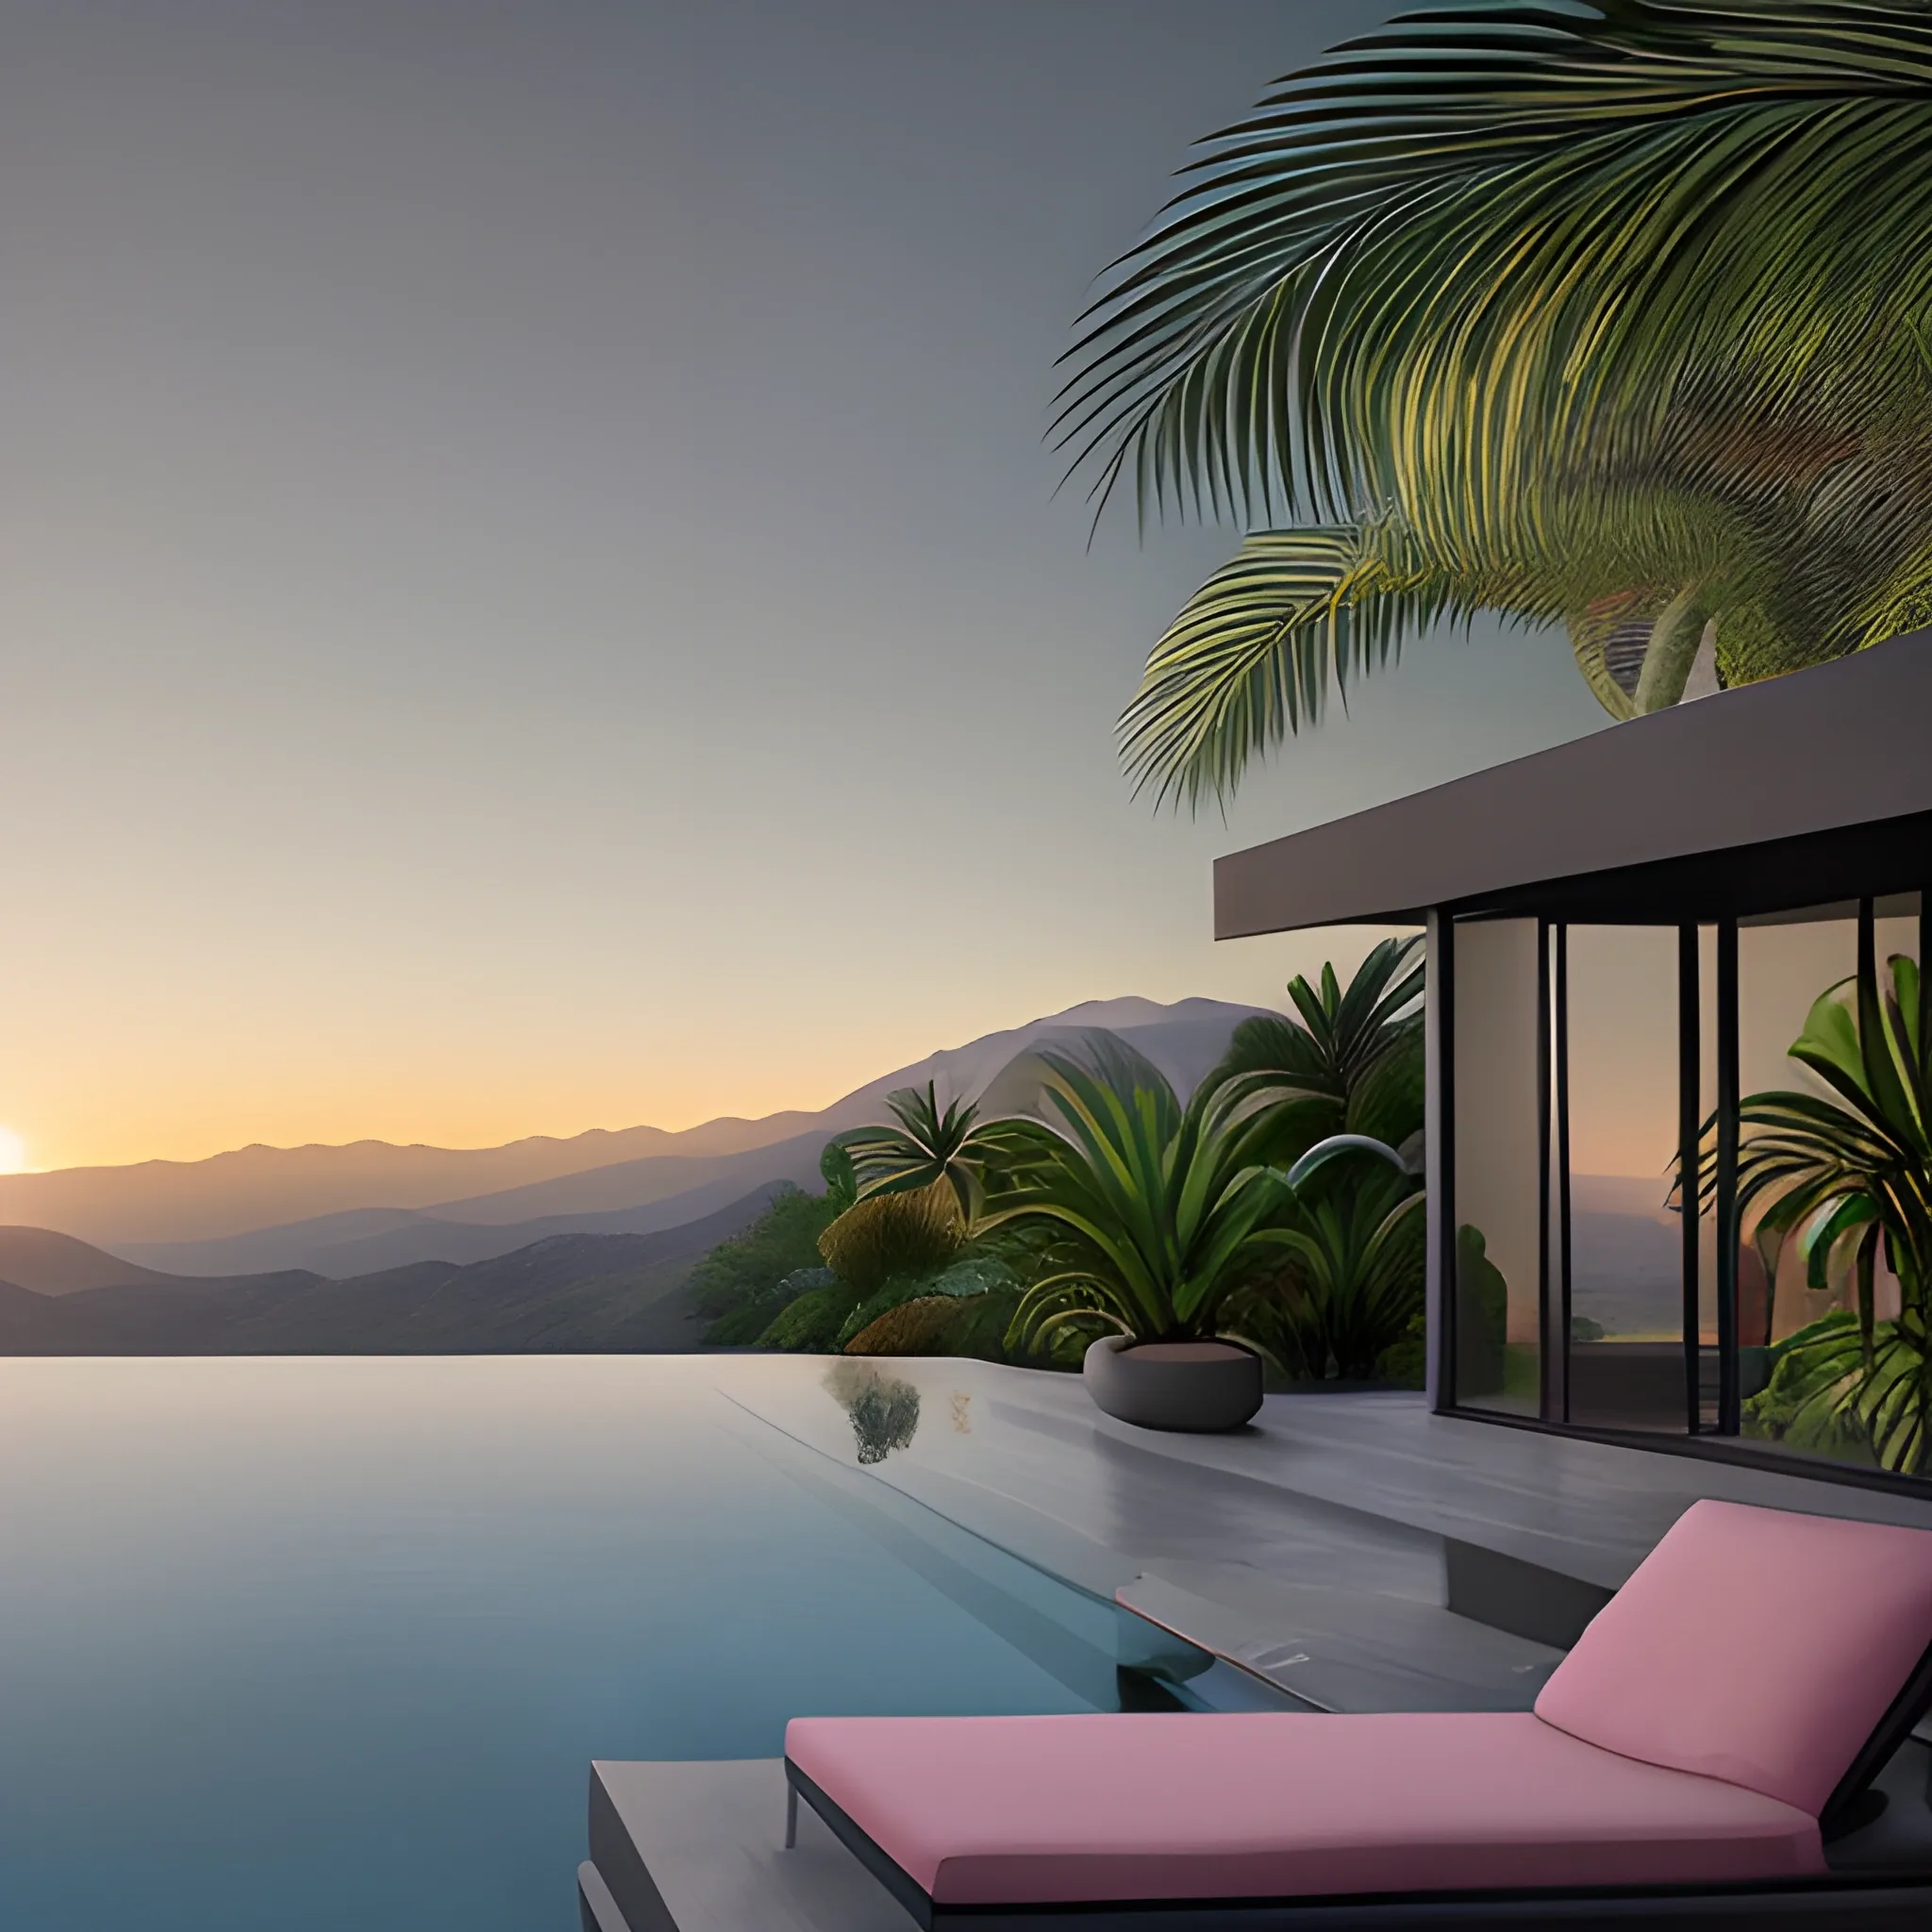 An infinity pool surrounded by dark grey wall on the left (not on the back side towards the landscape view) looking out into the mount Canigou landscape. One palm tree in a jungle garden on the right. Golden hour with a pink hue. West Anderson style. Digital art.